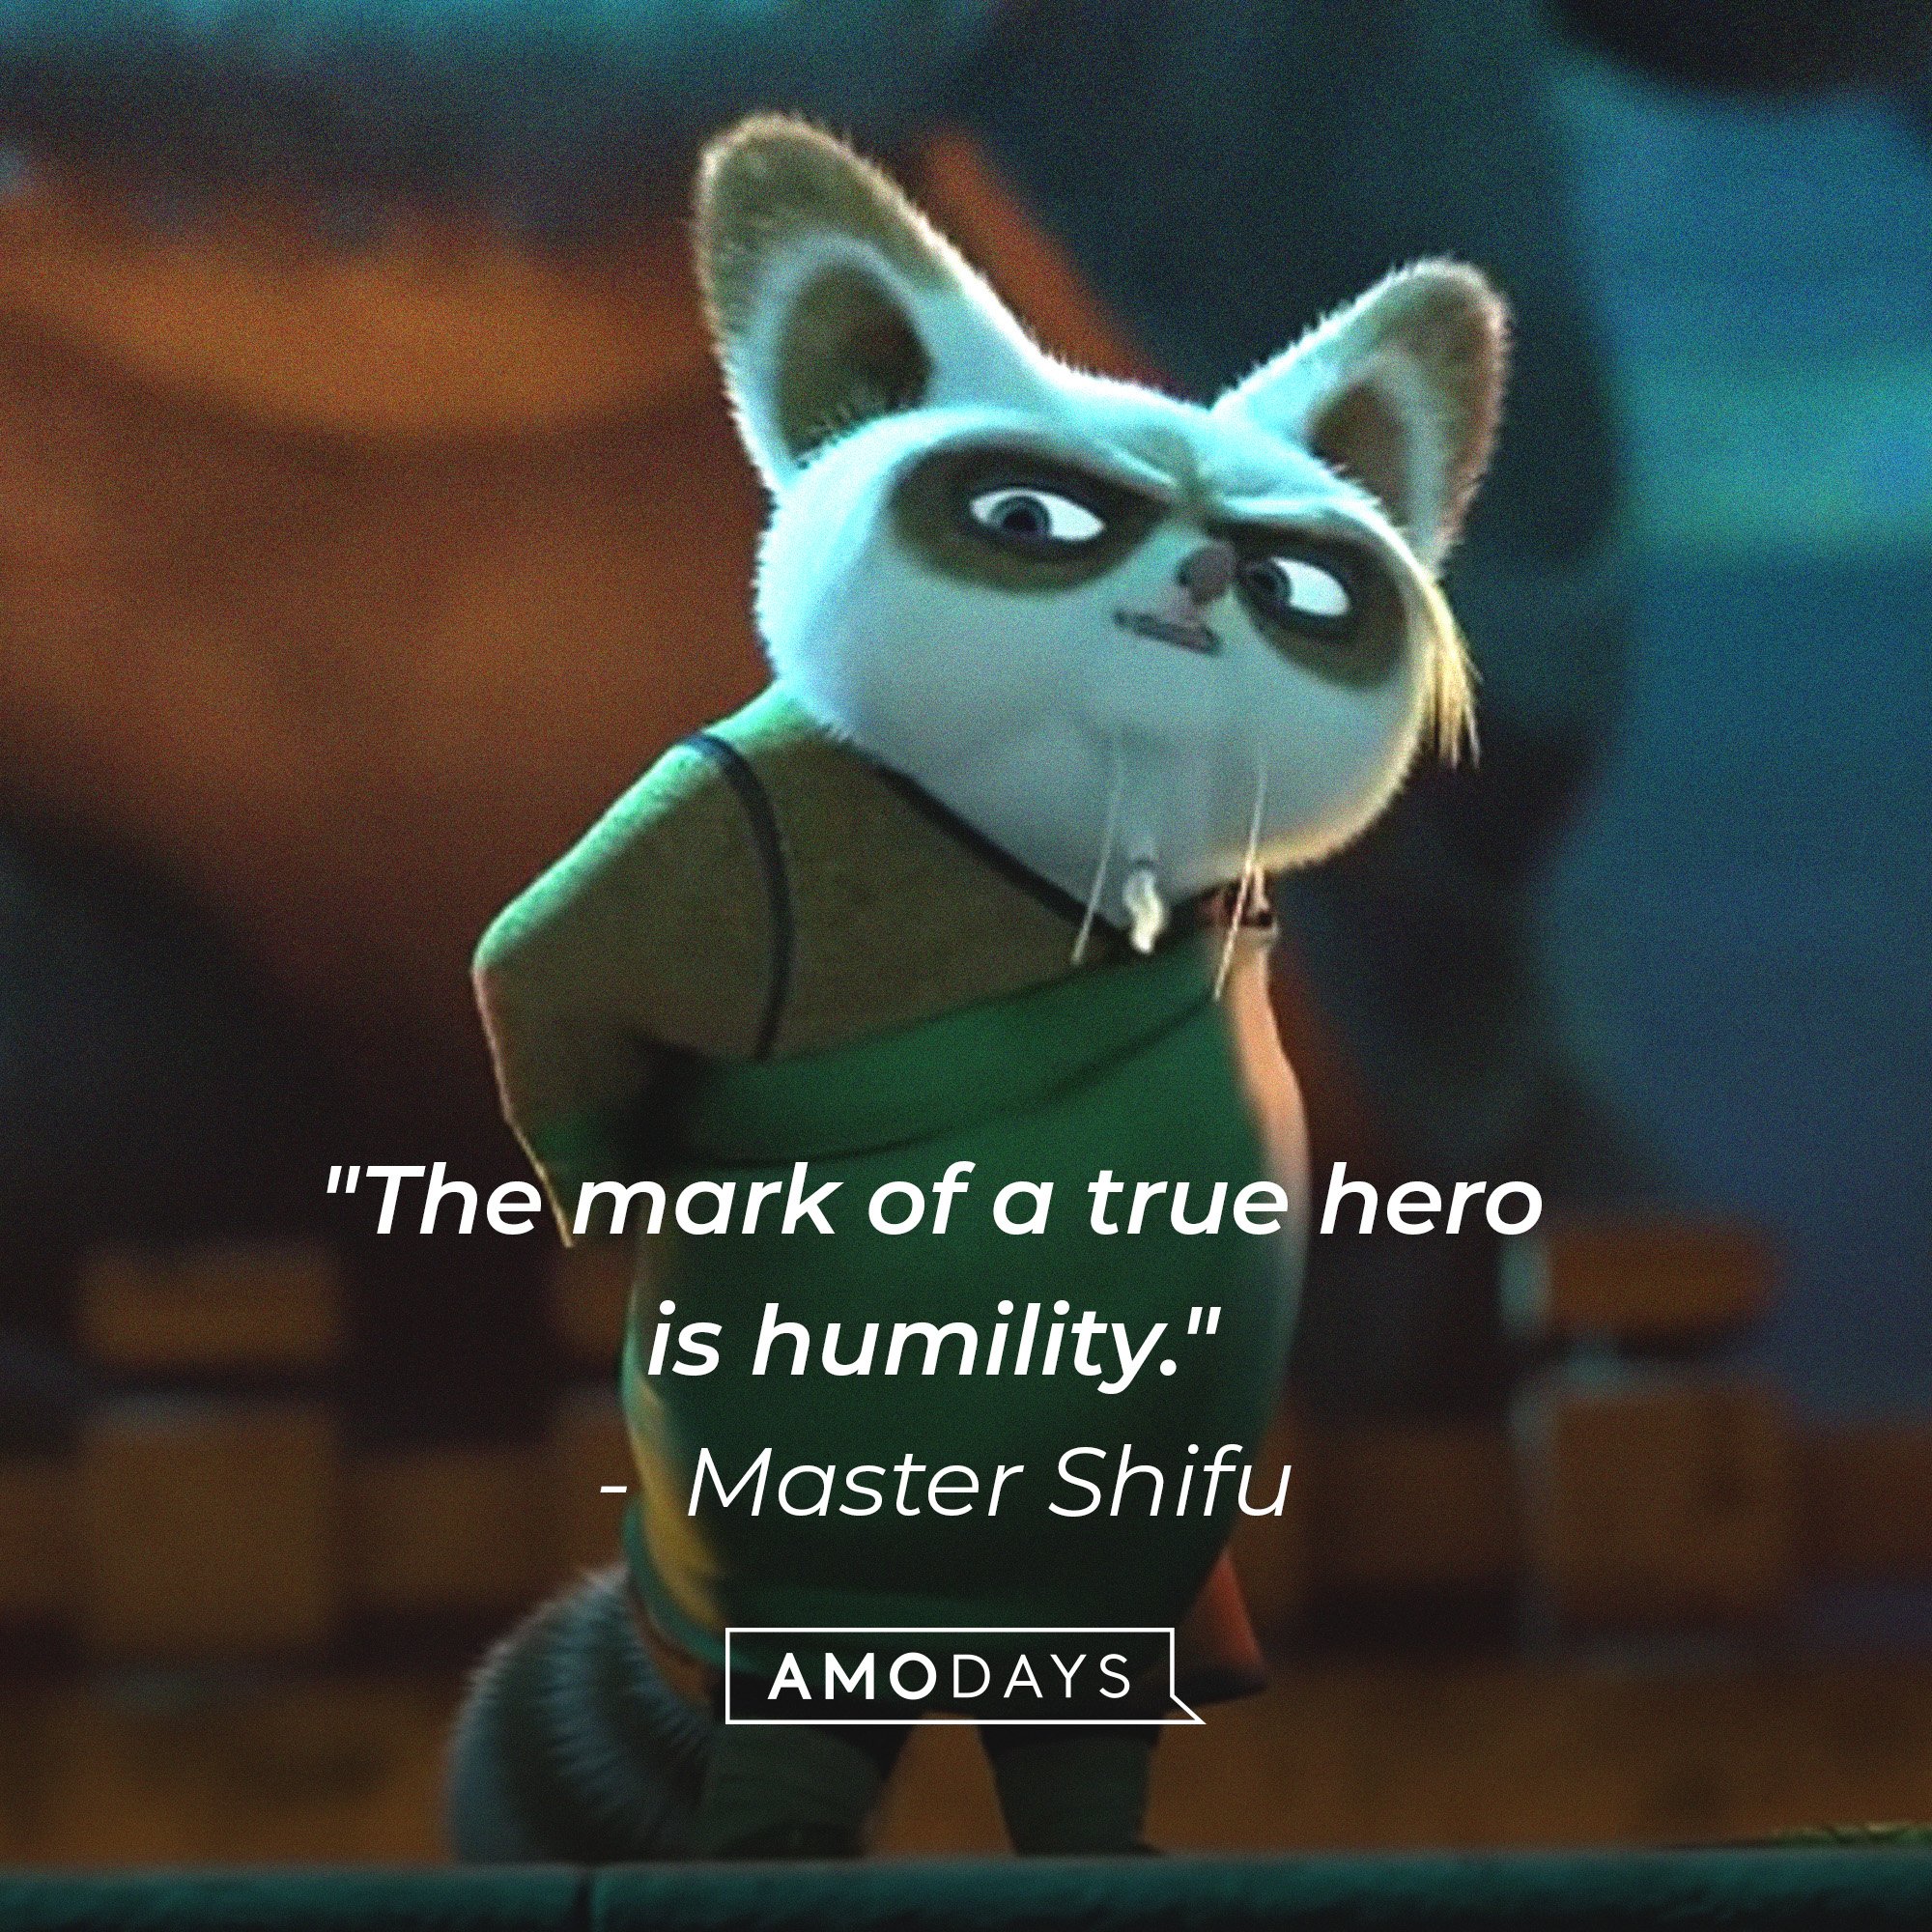 Master Shifu’s quote: "The mark of a true hero is humility." | Image: AmoDays